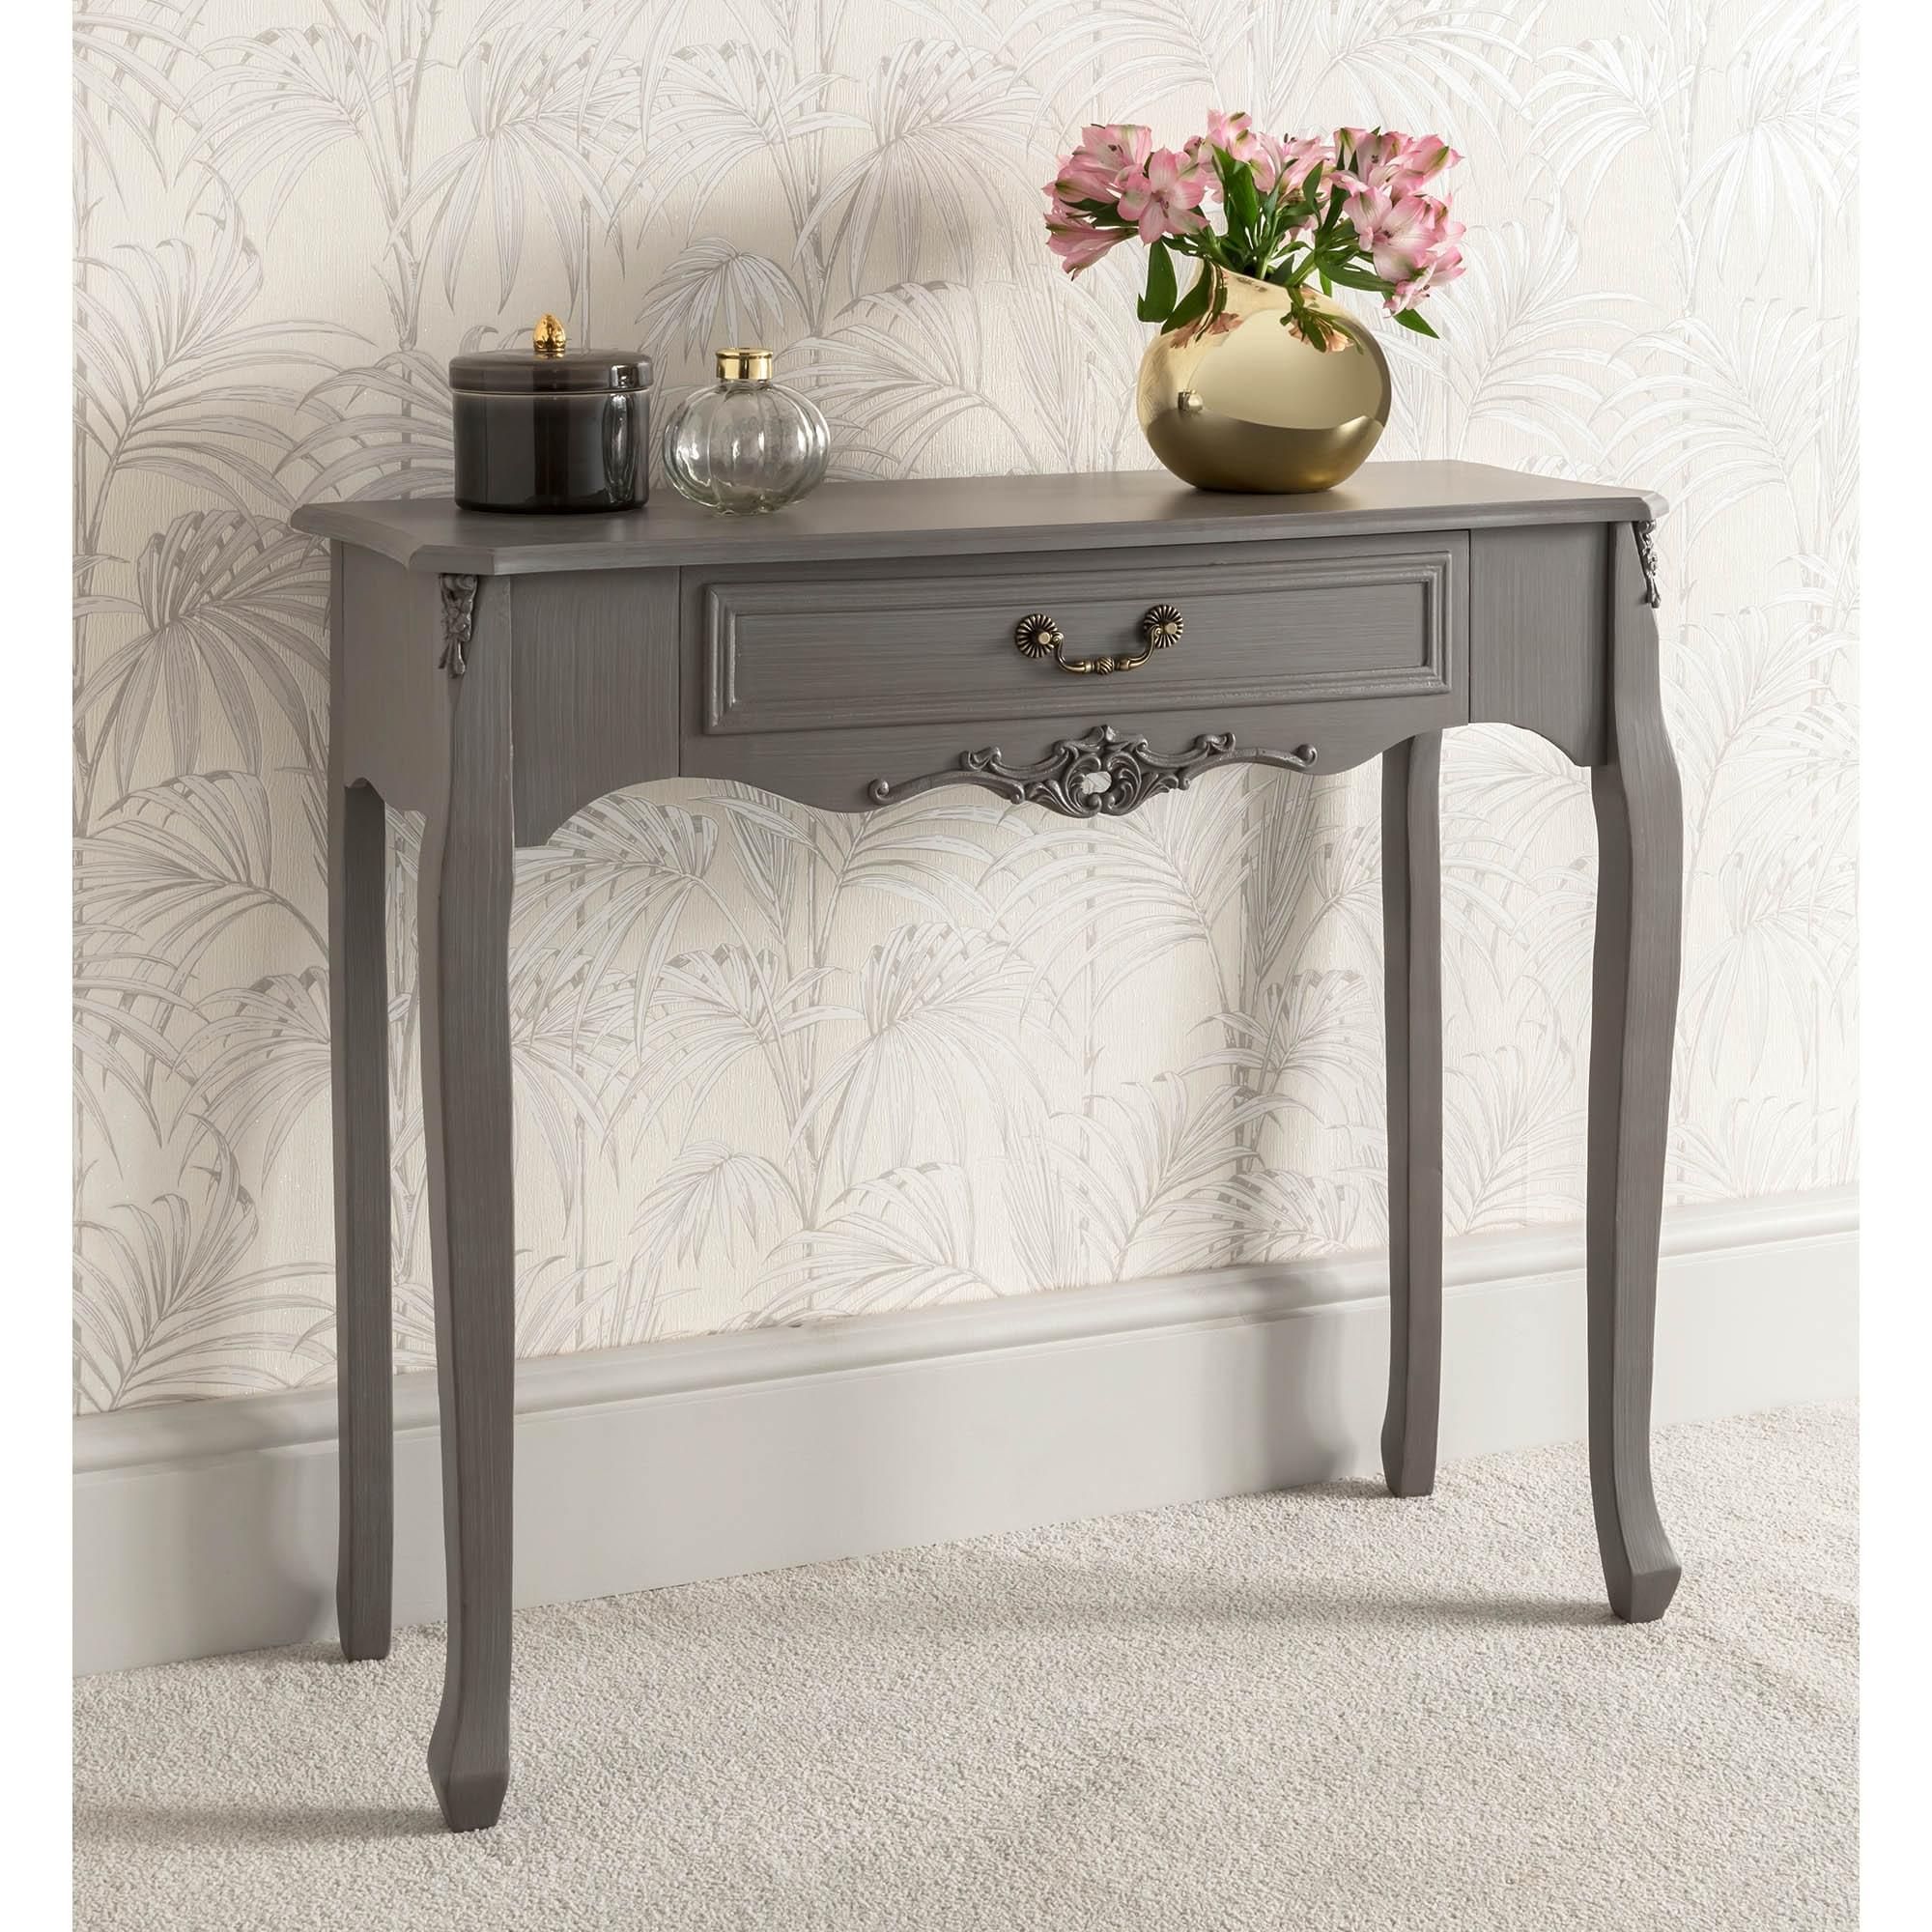 Grey 1 Drawer Antique French Style Console Table | Shabby Chic Table Throughout Antique White Black Console Tables (View 4 of 20)